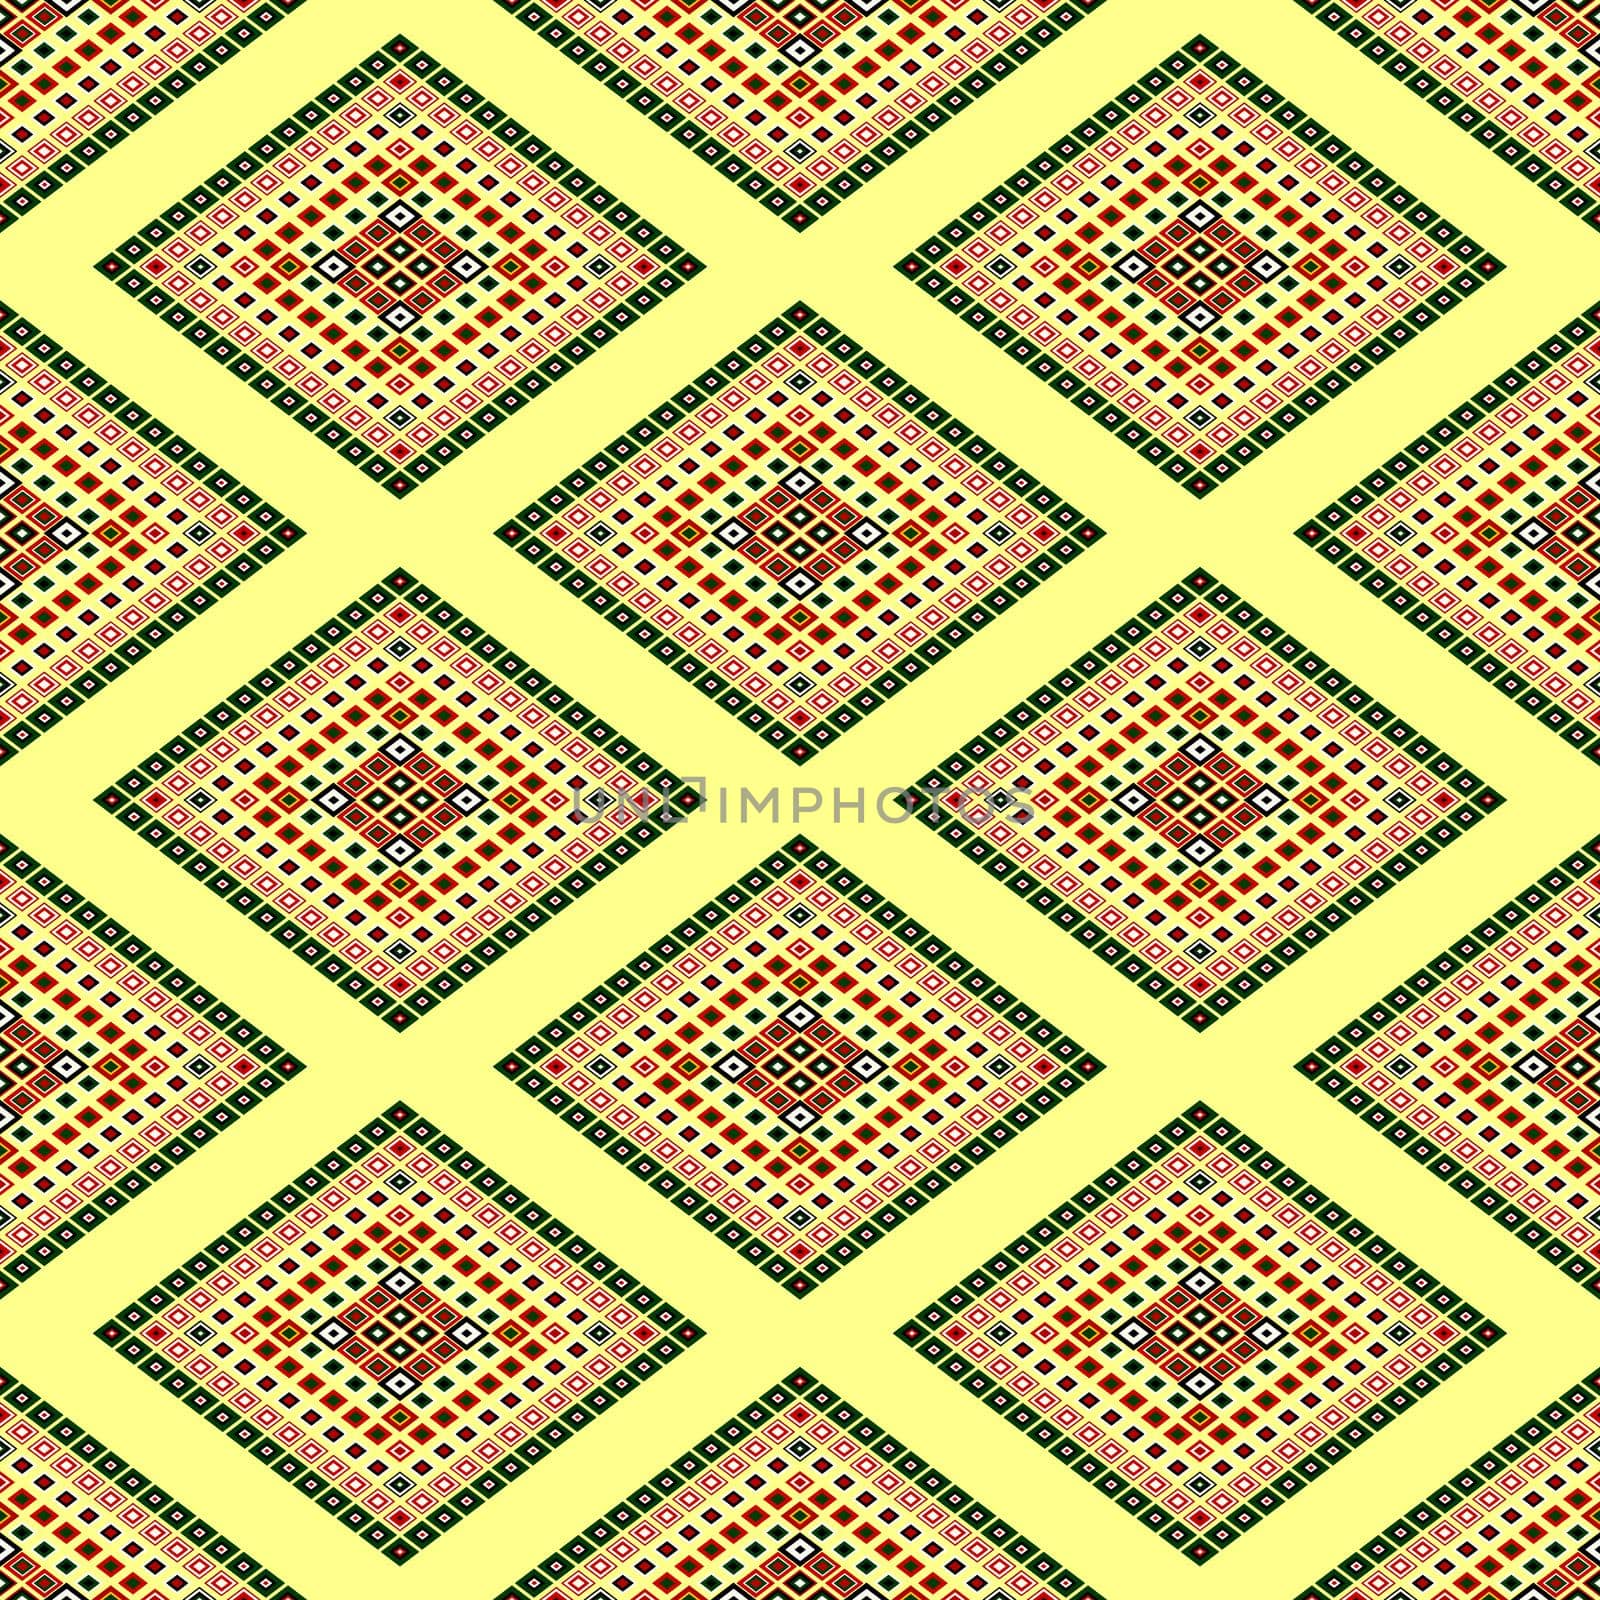 Seamless pattern of the colored blocks. Abstract vector design.